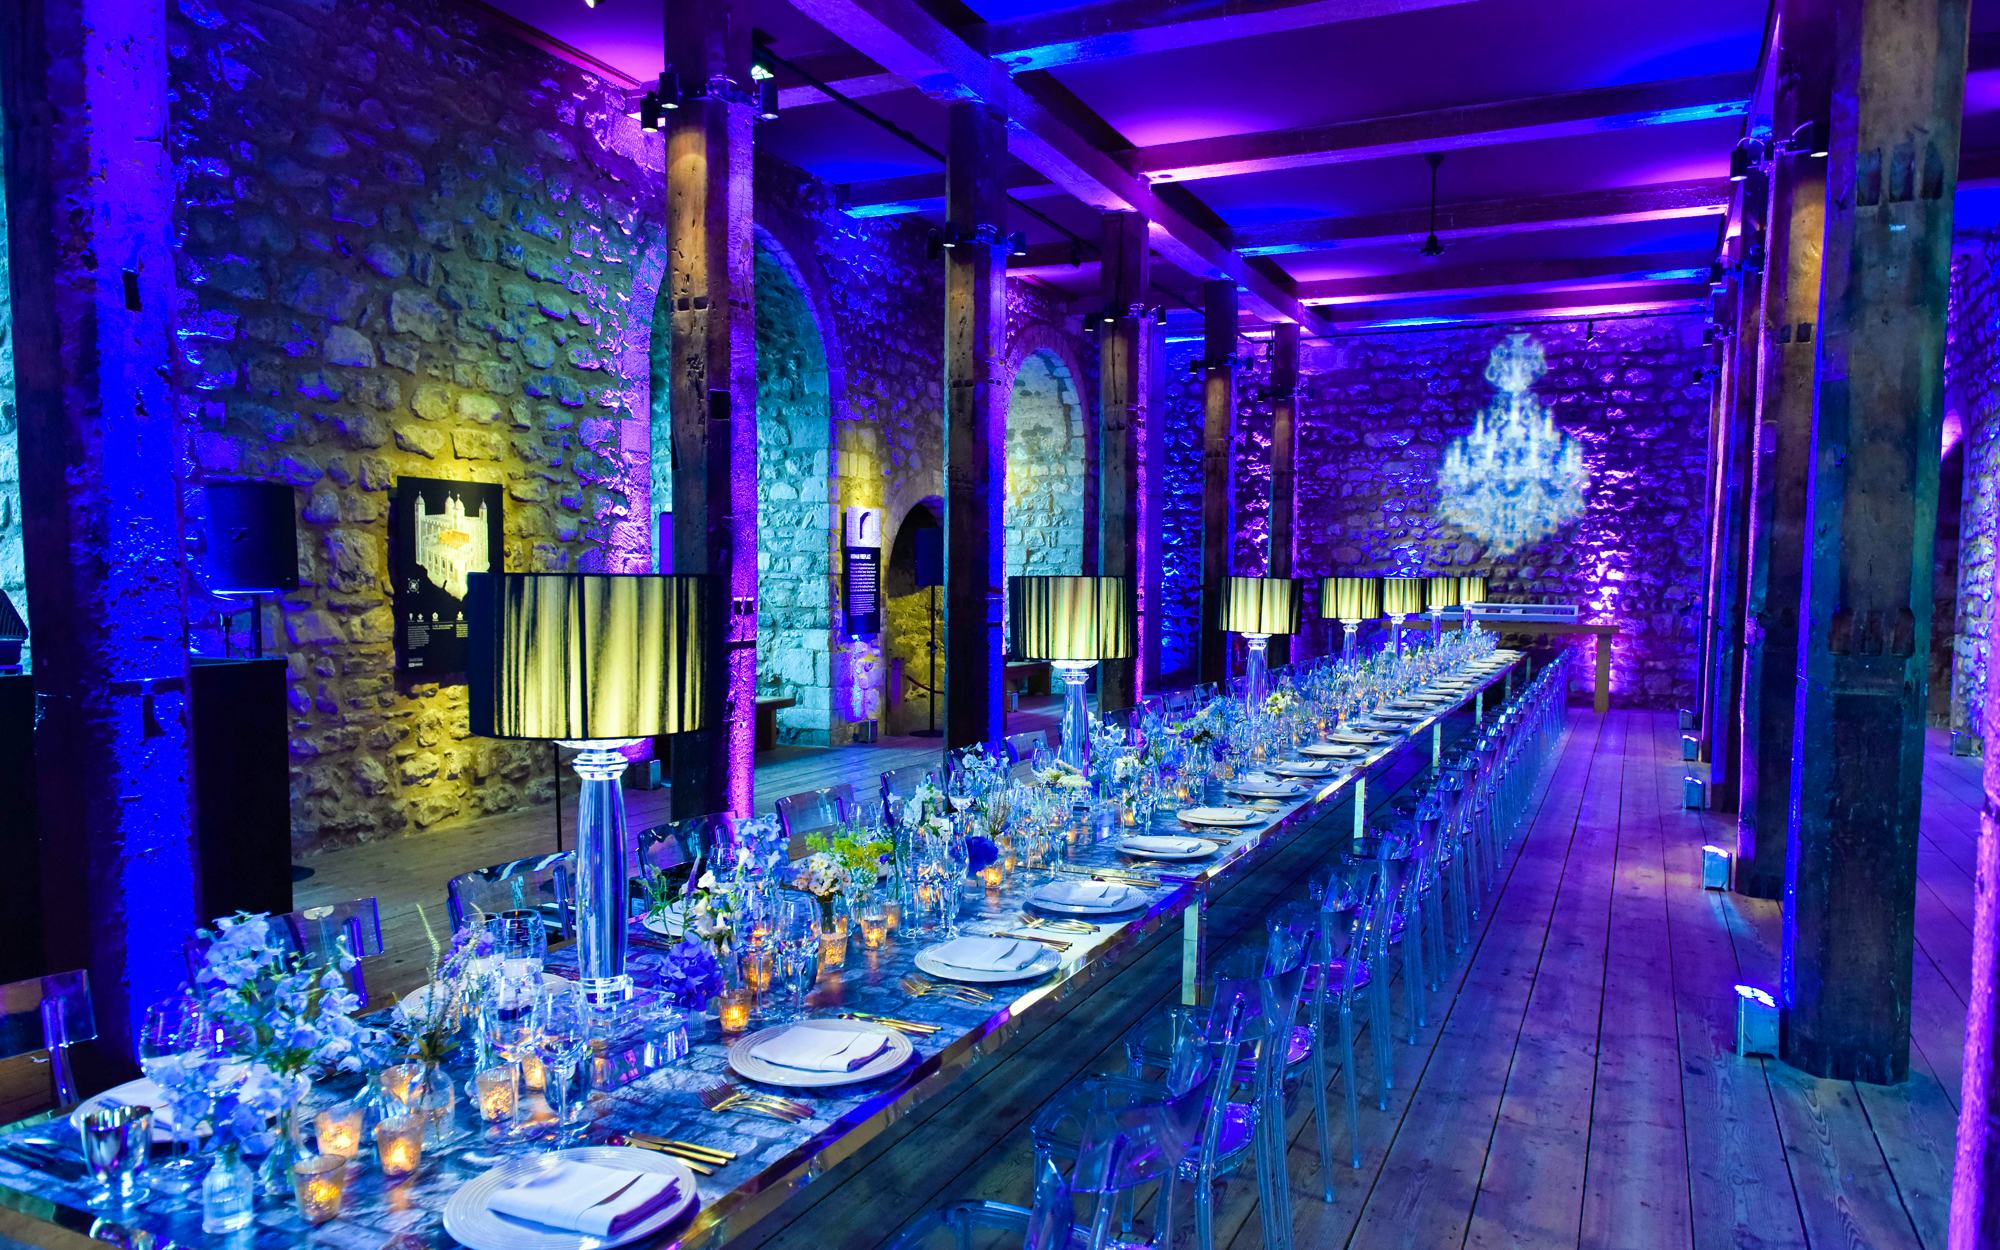 Tower of London venues events historic attractions private viewing group bookings dining uk